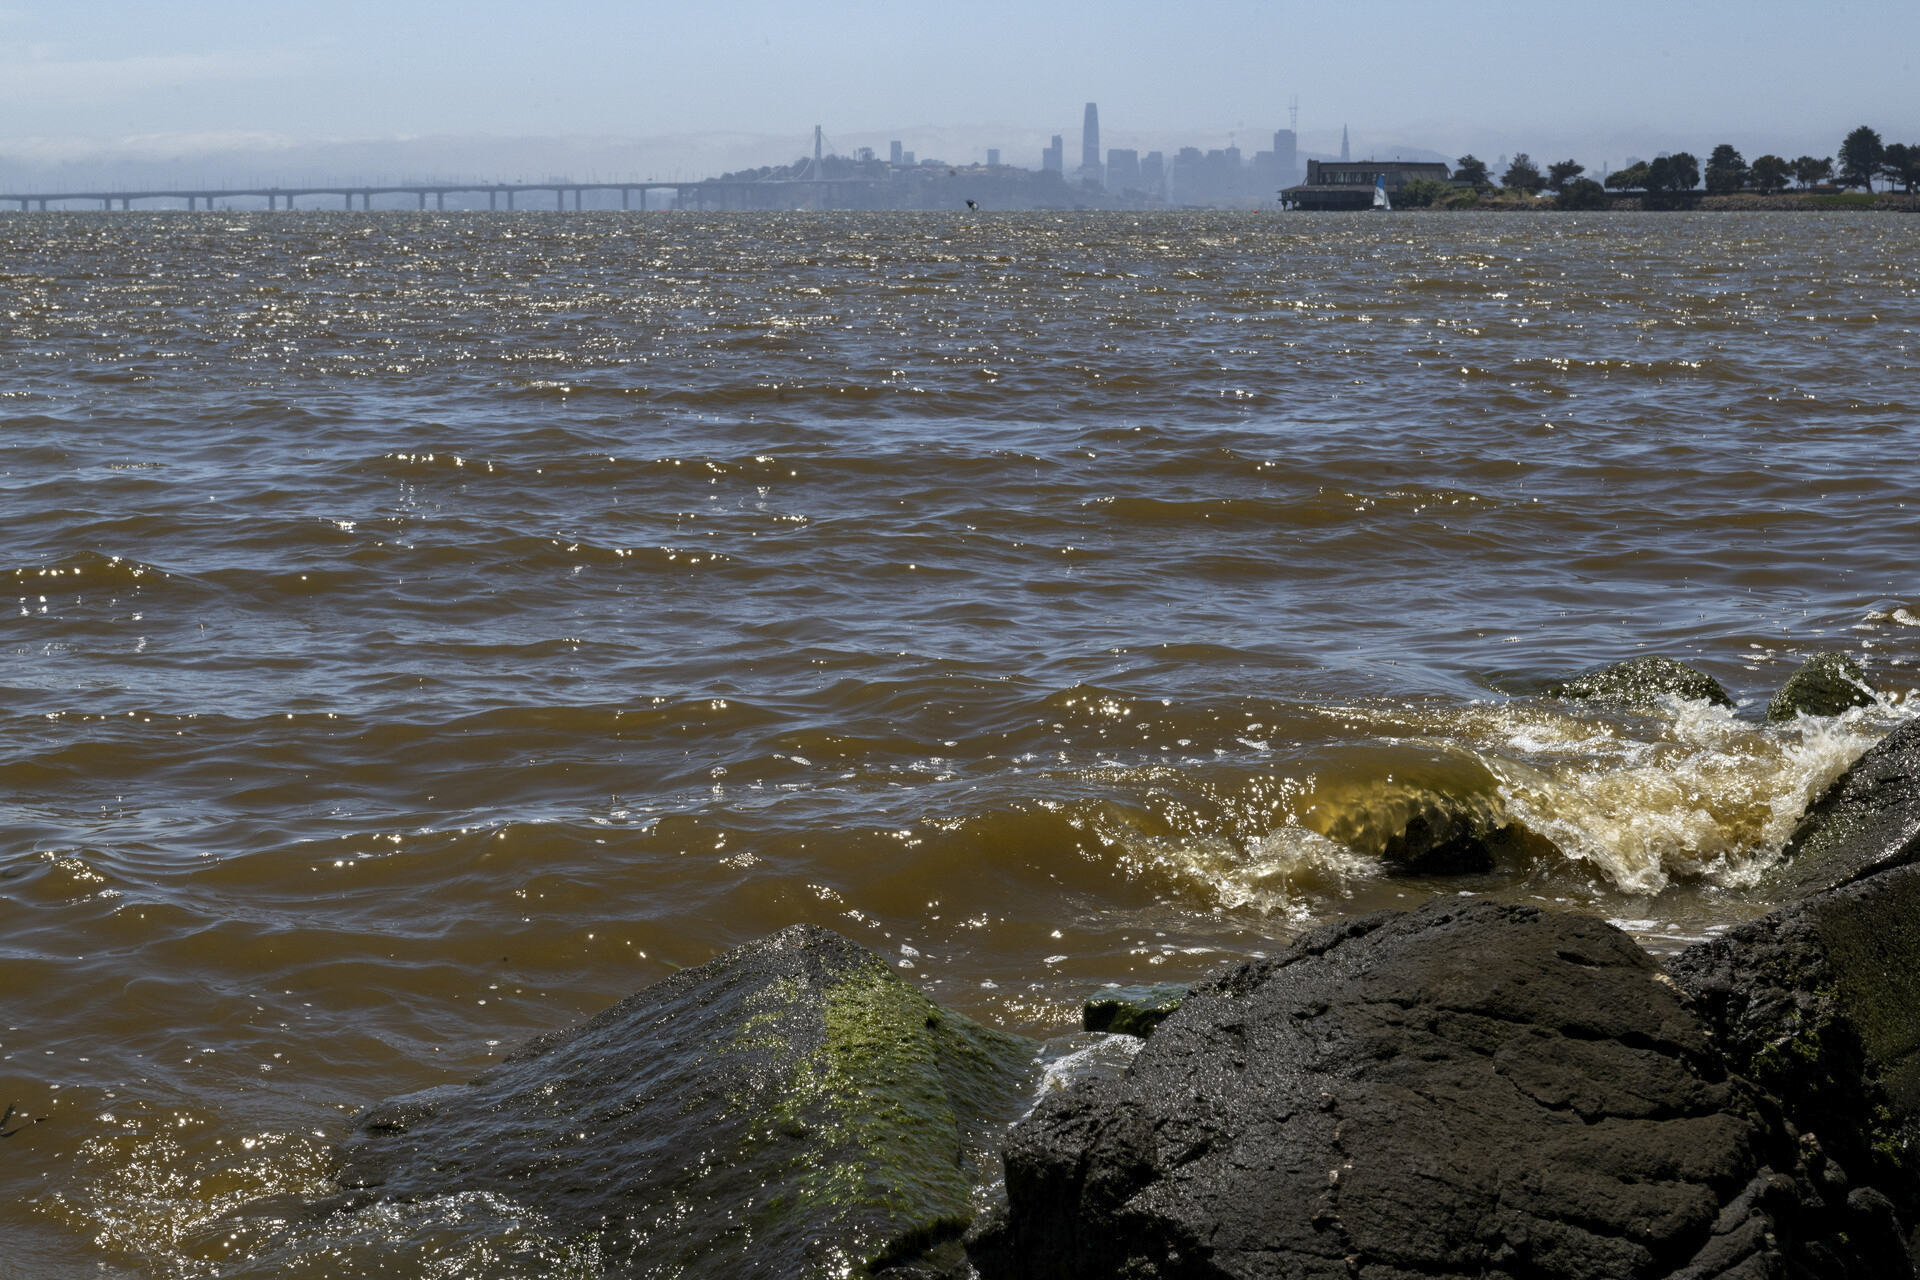 Dark reddish-orange looking water splashes agains rocks in the foreground with the San Francisco skyline in the distance.